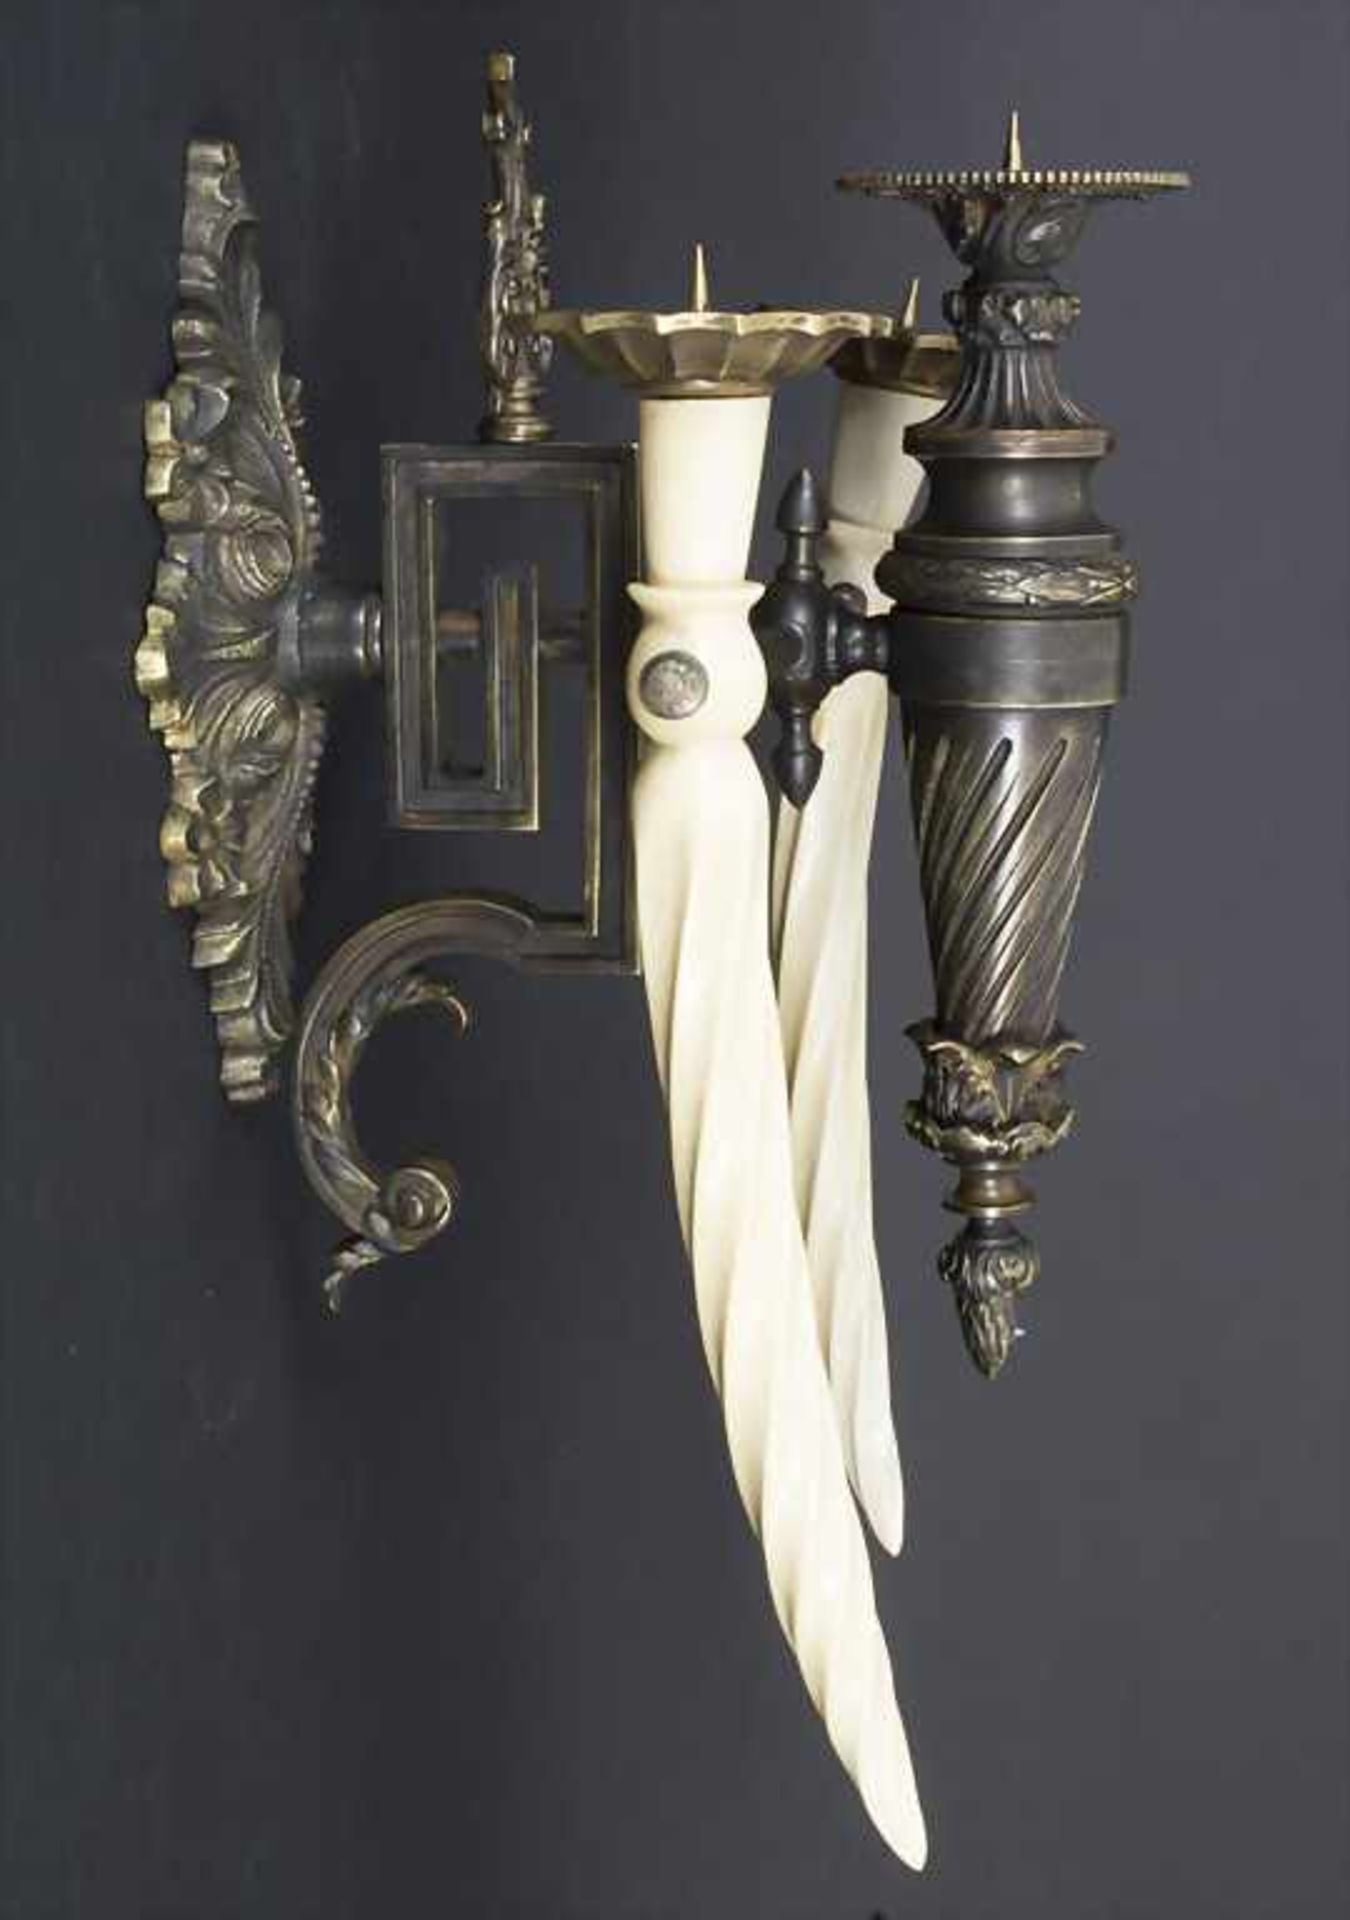 Wandhalter mit Kerzenleuchtern / A wall holder with candle sticks, 19. Jh.Material: Bronze, - Image 2 of 5